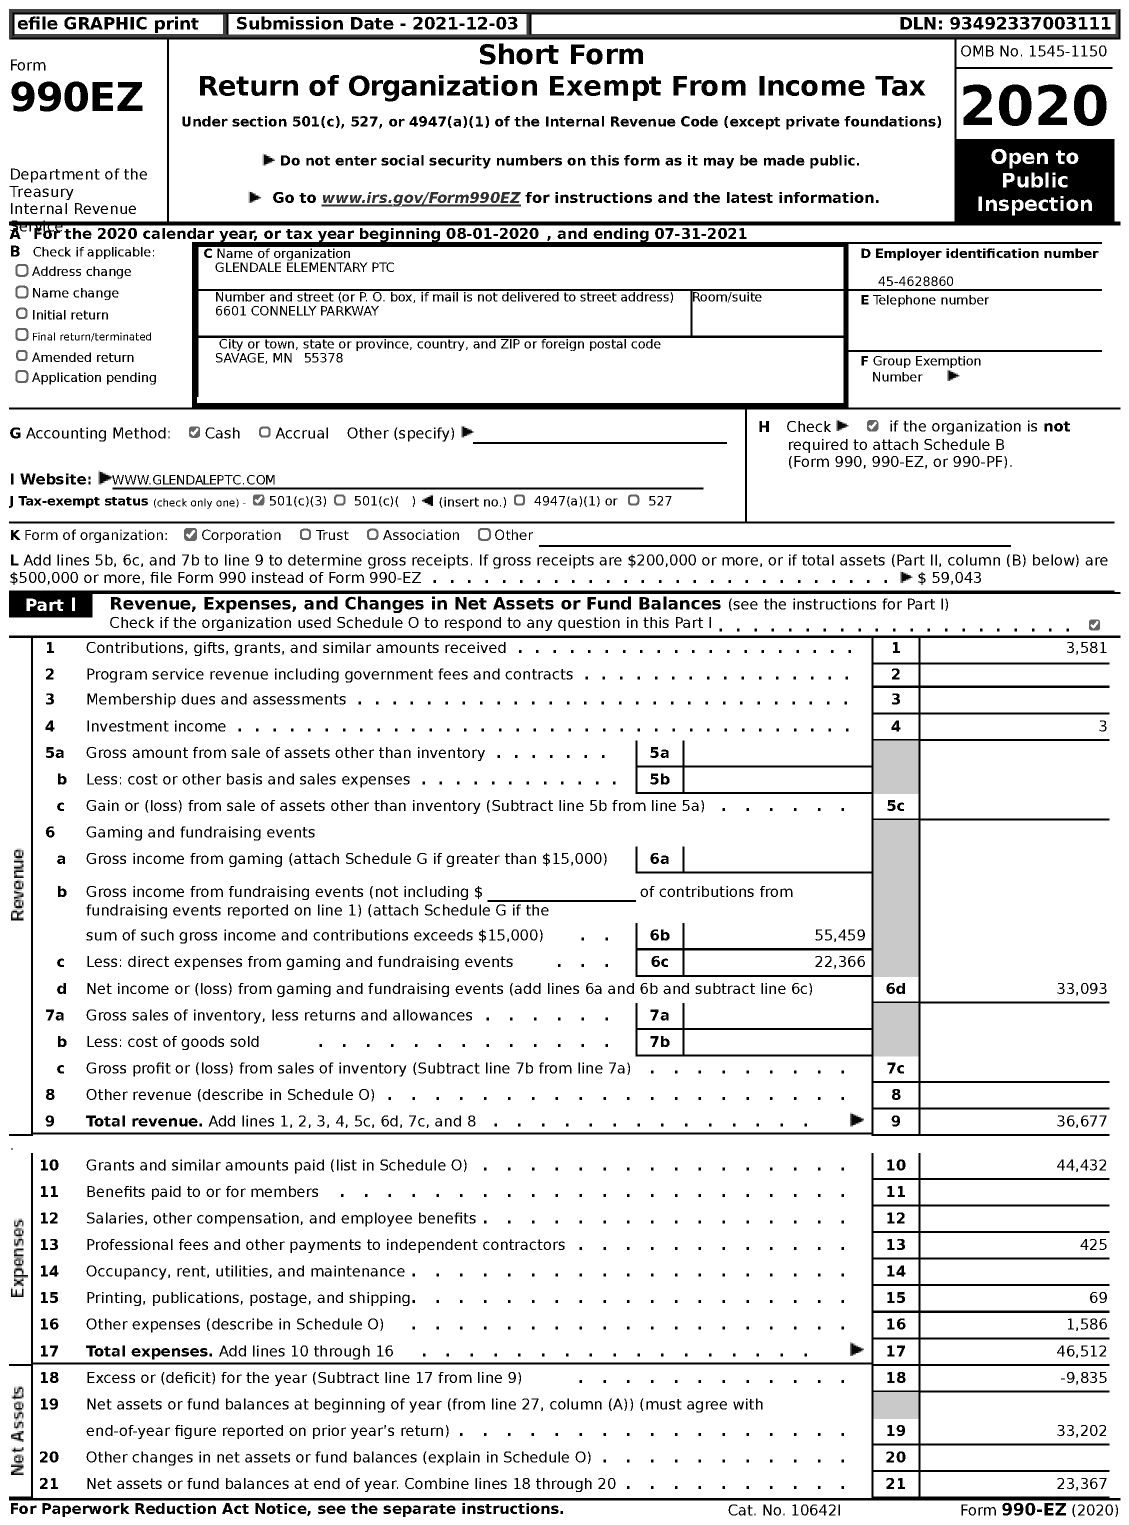 Image of first page of 2020 Form 990EZ for Glendale Elementary PTC